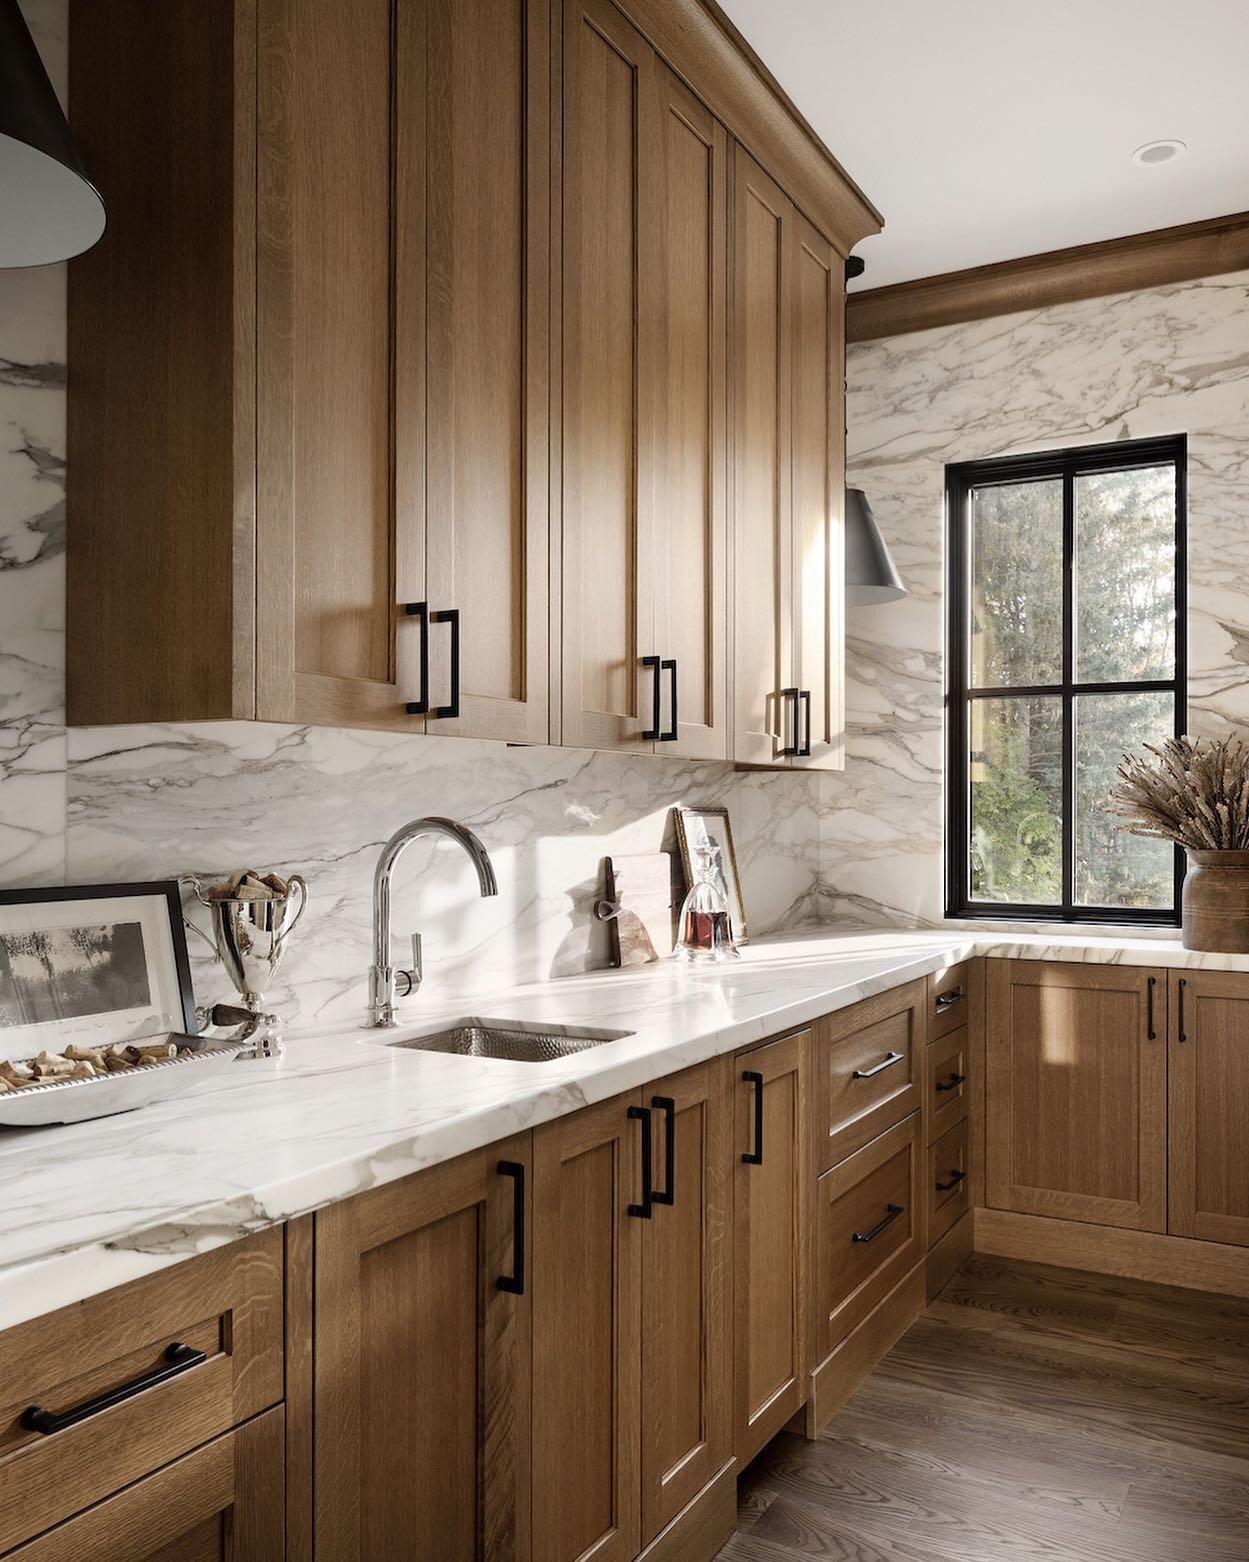 Our butler's pantry is just off of our kitchen, making it the perfect spot to shake up those martinis when we are entertaining. 
The rift-cut oak cabinetry is paired with marble that extends up the walls taking center stage. 
Behind cabinetry are a @